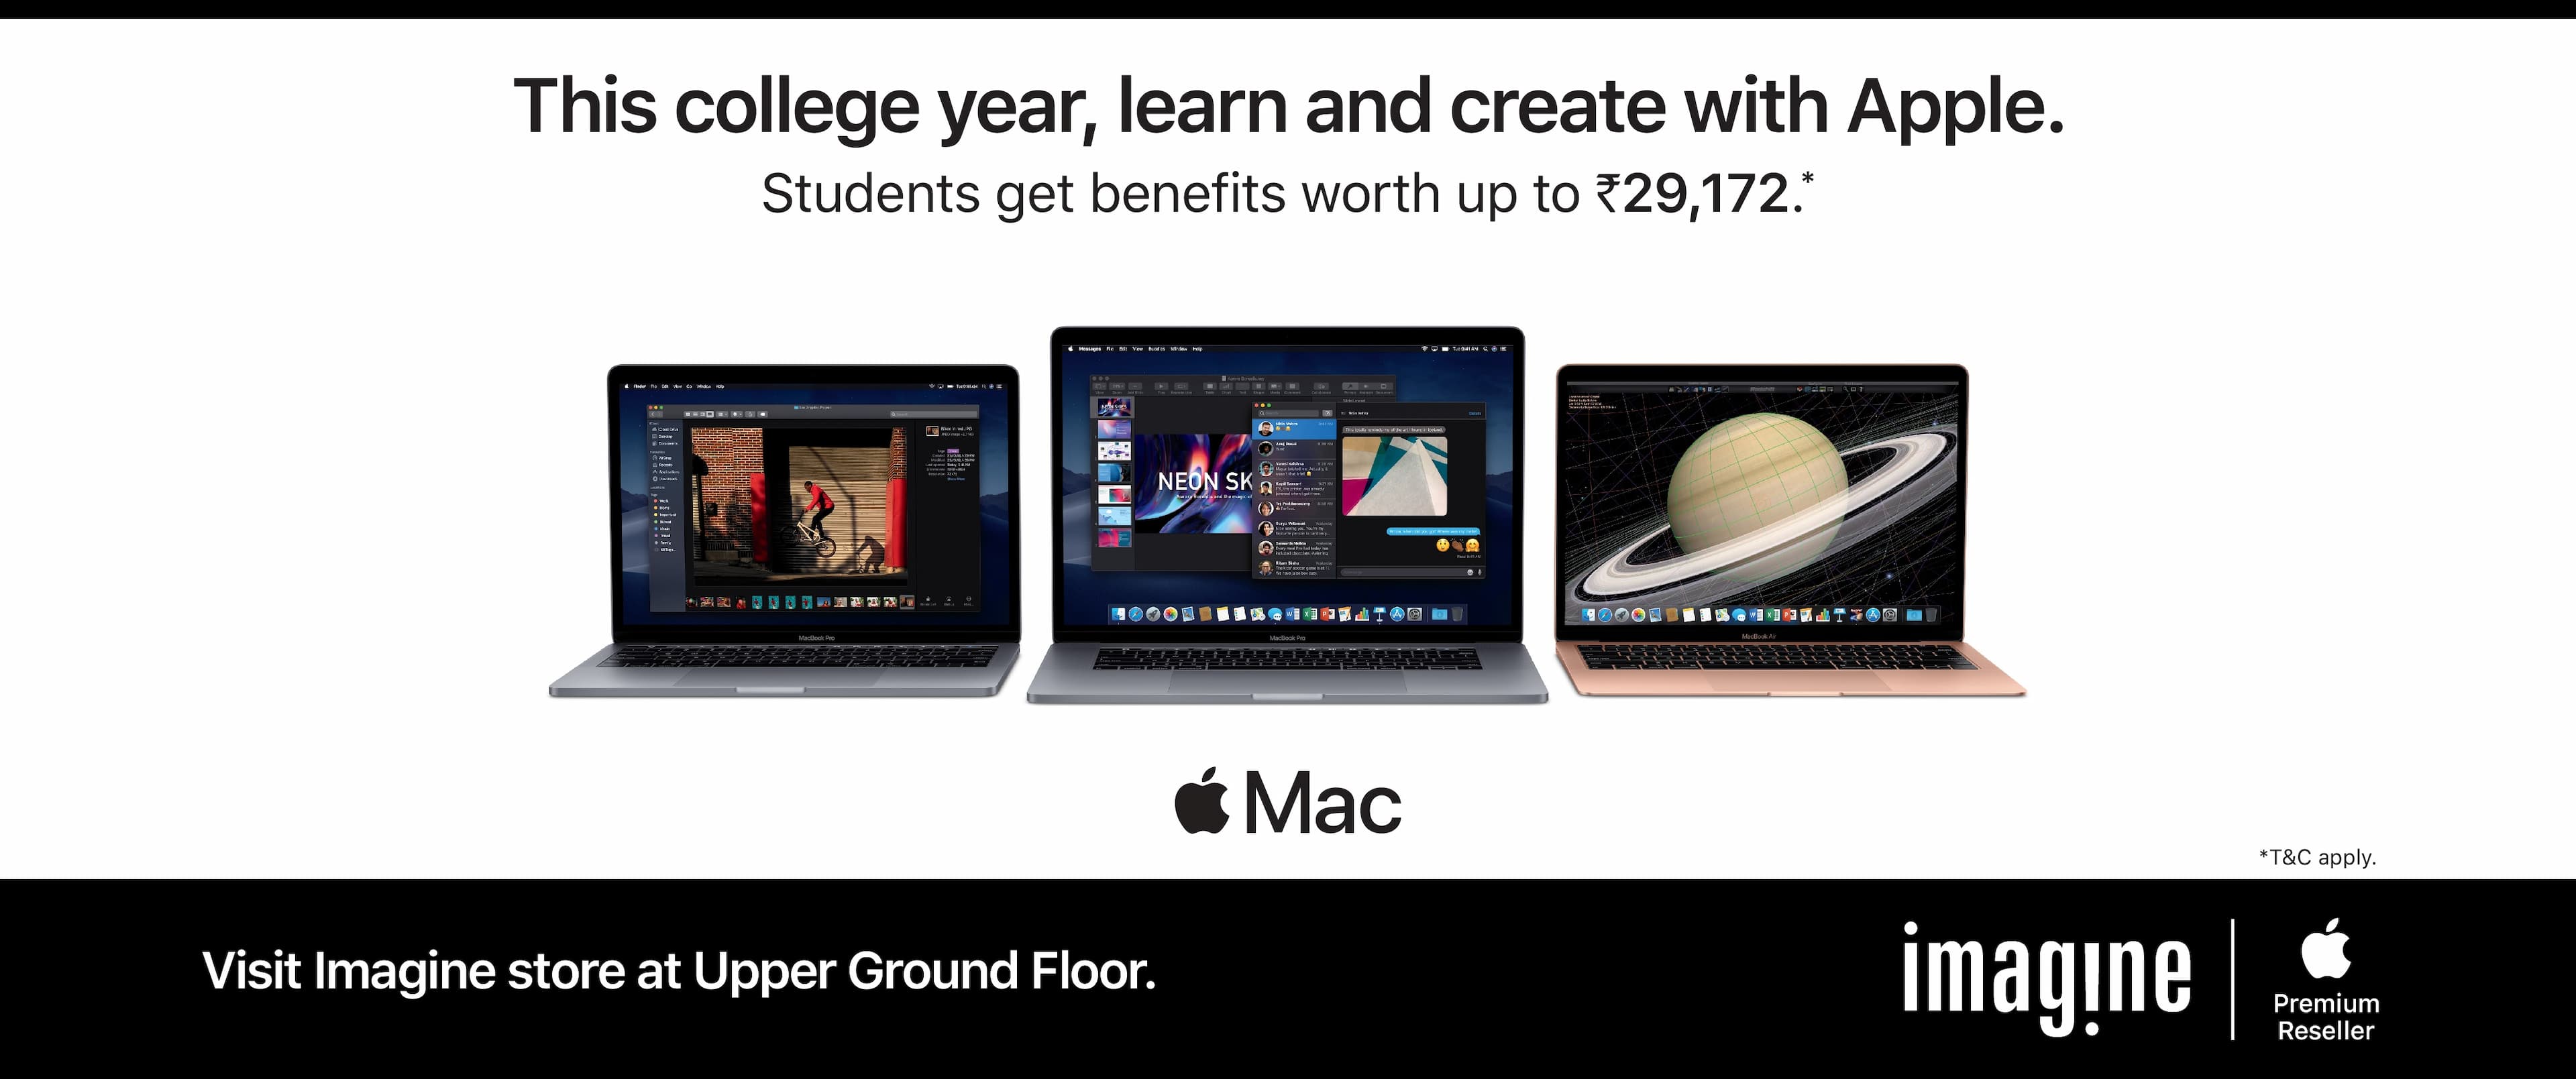 Apple | This College Year,Learn And Create With Apple